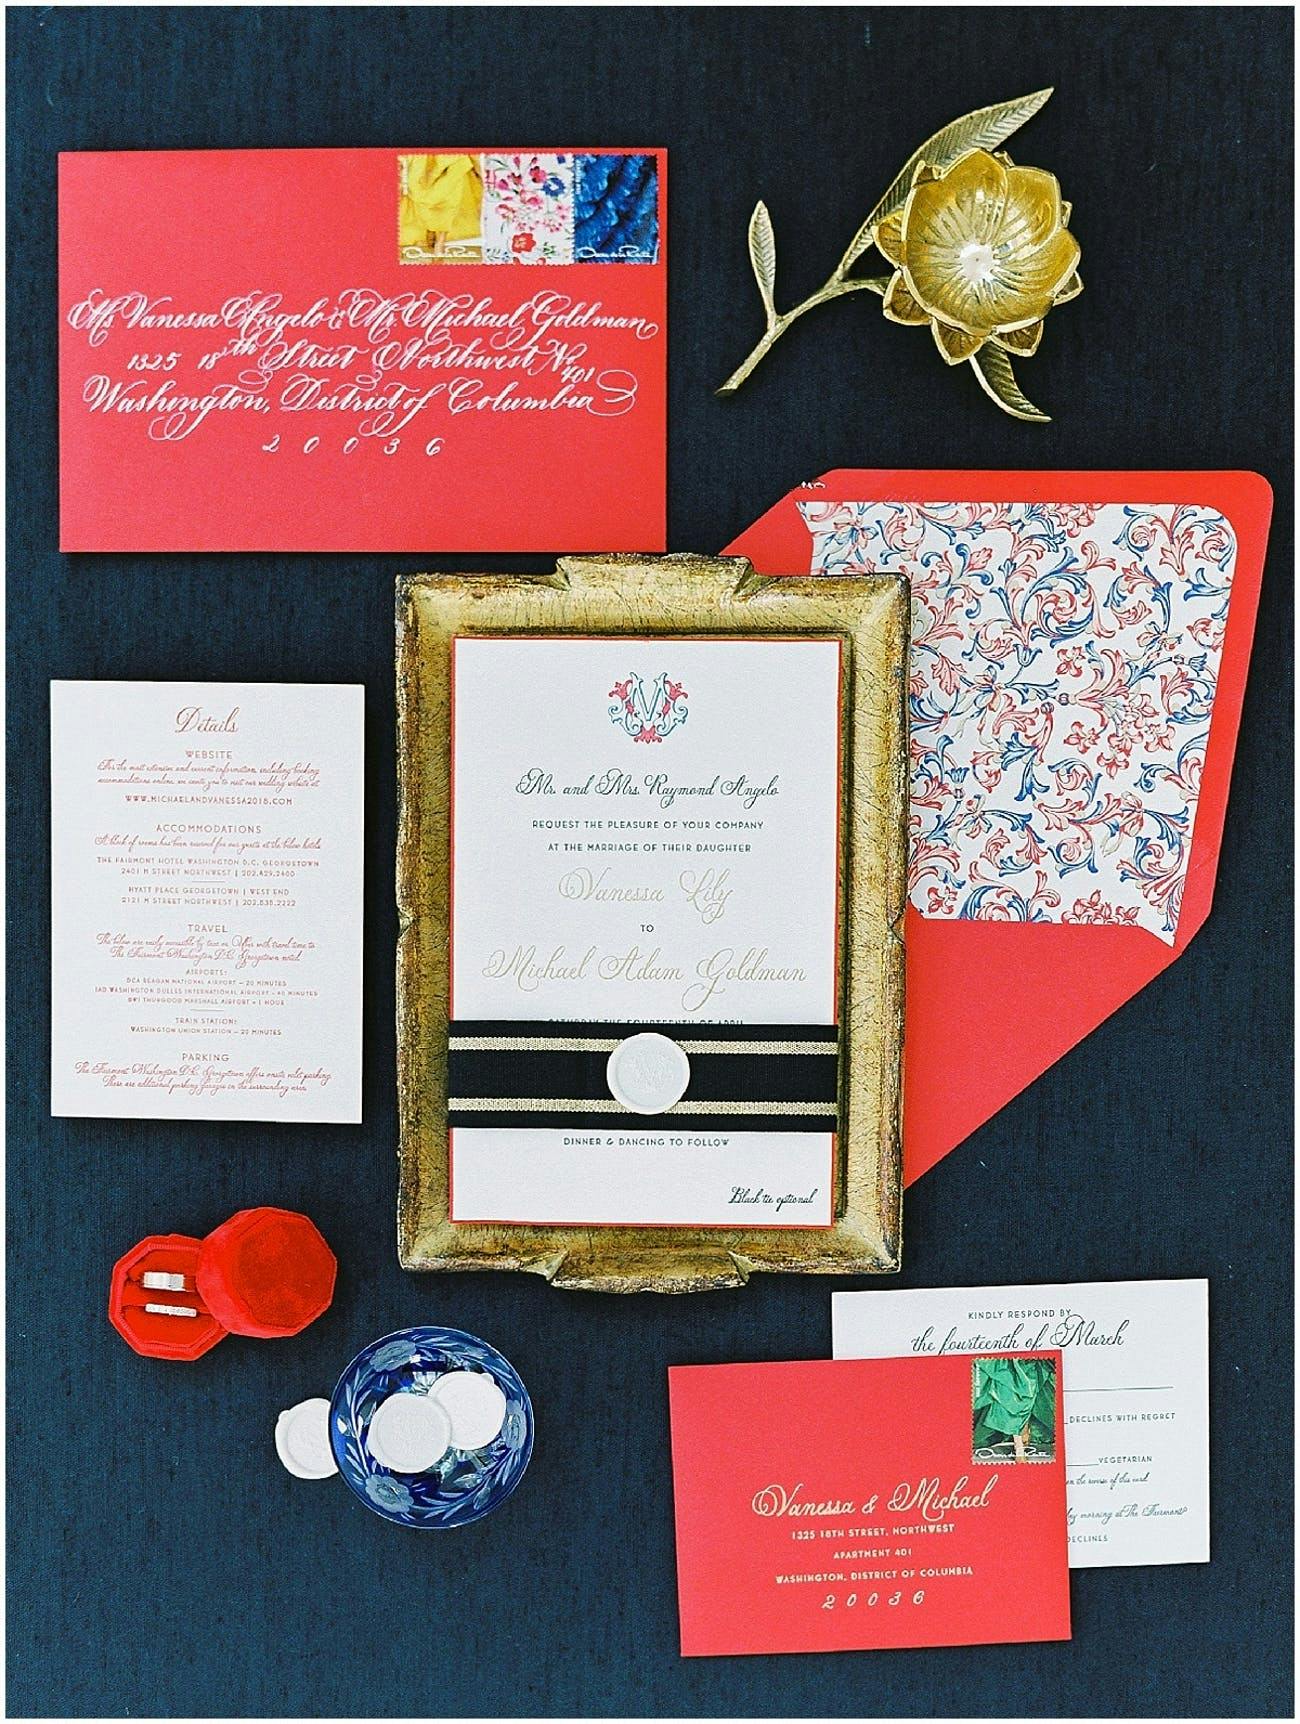 Gold-Framed Wedding Invitation with Red Envelopes and Paisley-Patterned Inlay | PartySlate